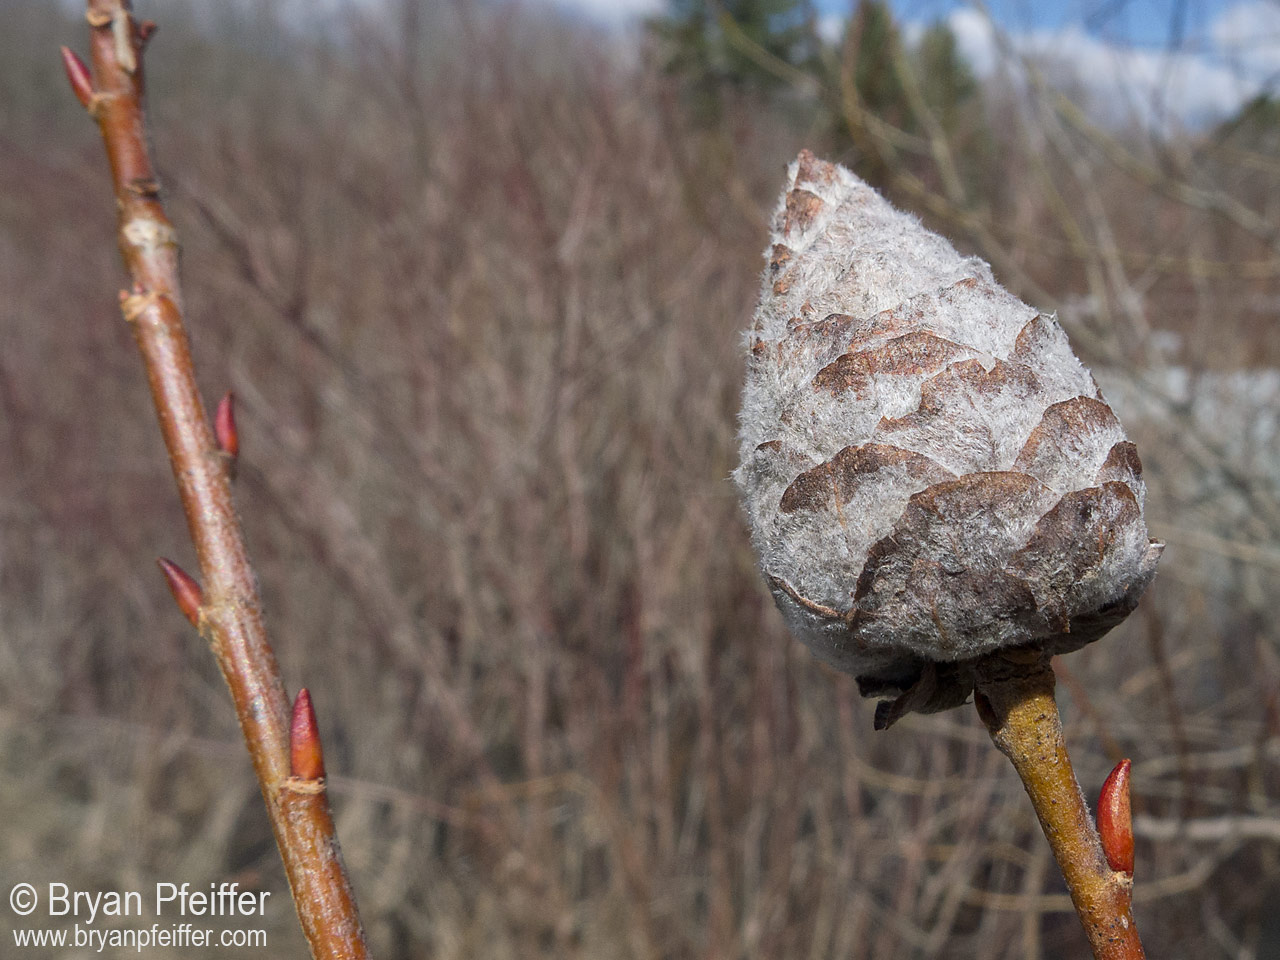 A Willow Pine Gall and twigs recognizable to many as willows (with those "naked leaf buds" lacking protective scale coverings.